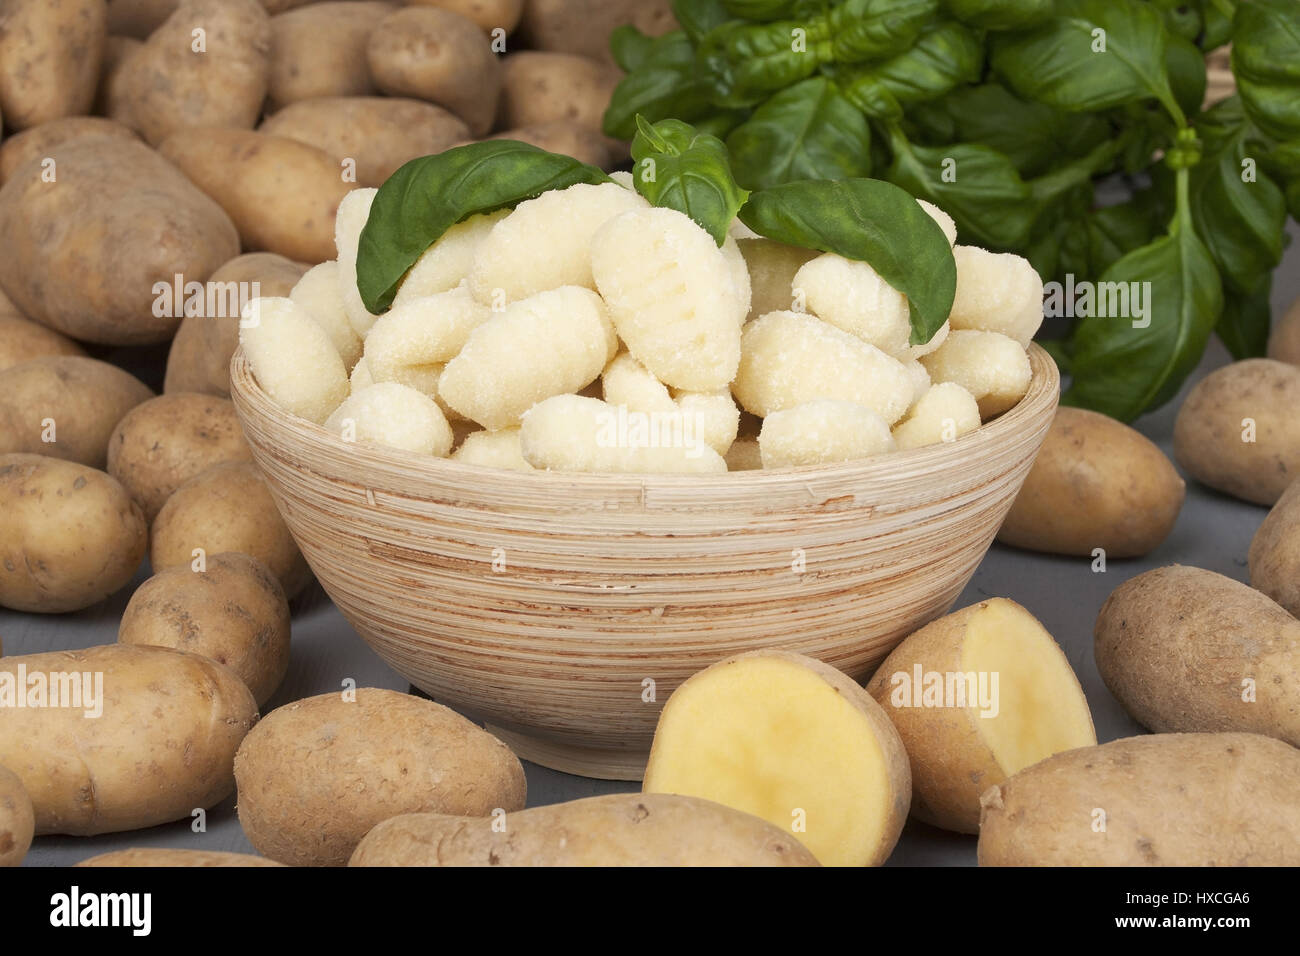 Gnocchis bowl in a bowl and potatoes, Gnocchi in an and potatoes |, Gnocchis in einer Schale und Kartoffeln |Gnocchi in a bowl and potatoes| Stock Photo